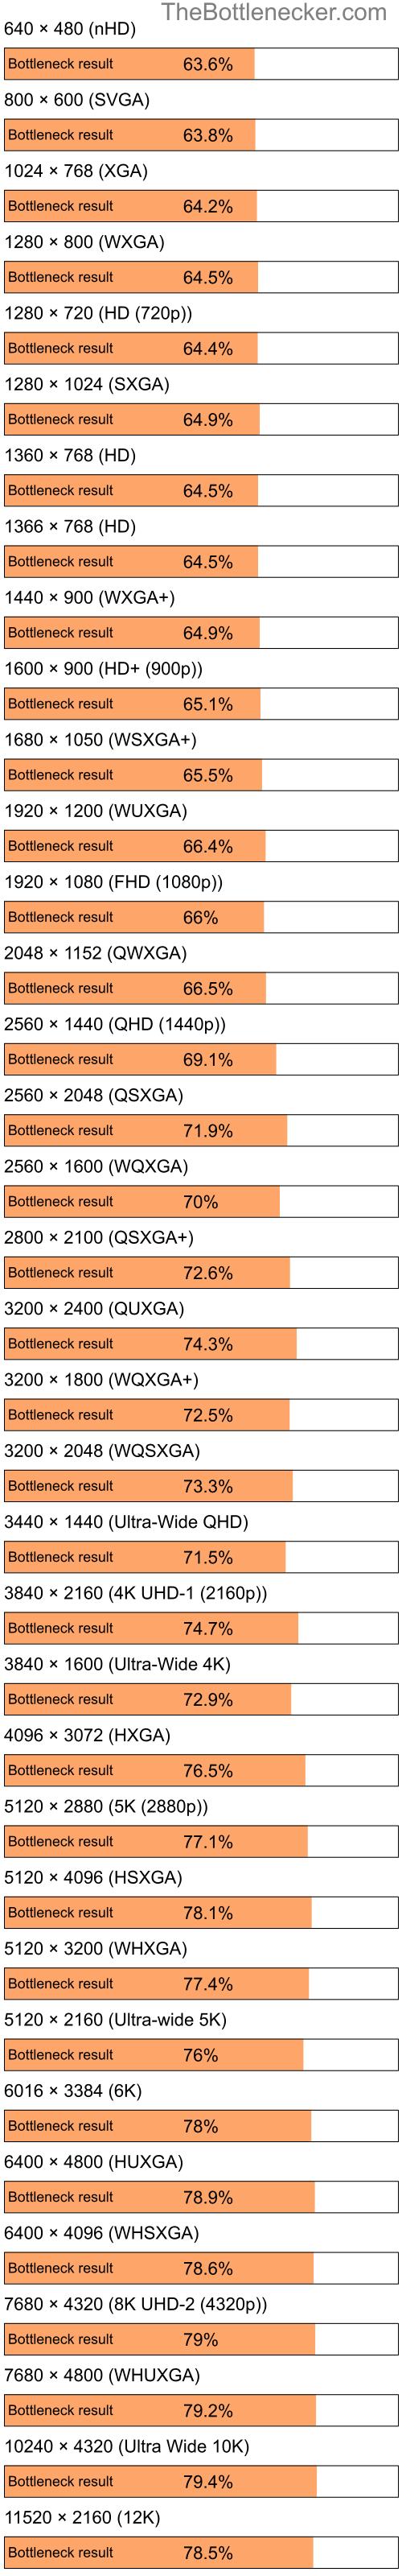 Bottleneck results by resolution for Intel Celeron M and AMD Mobility Radeon HD 2400 in General Tasks